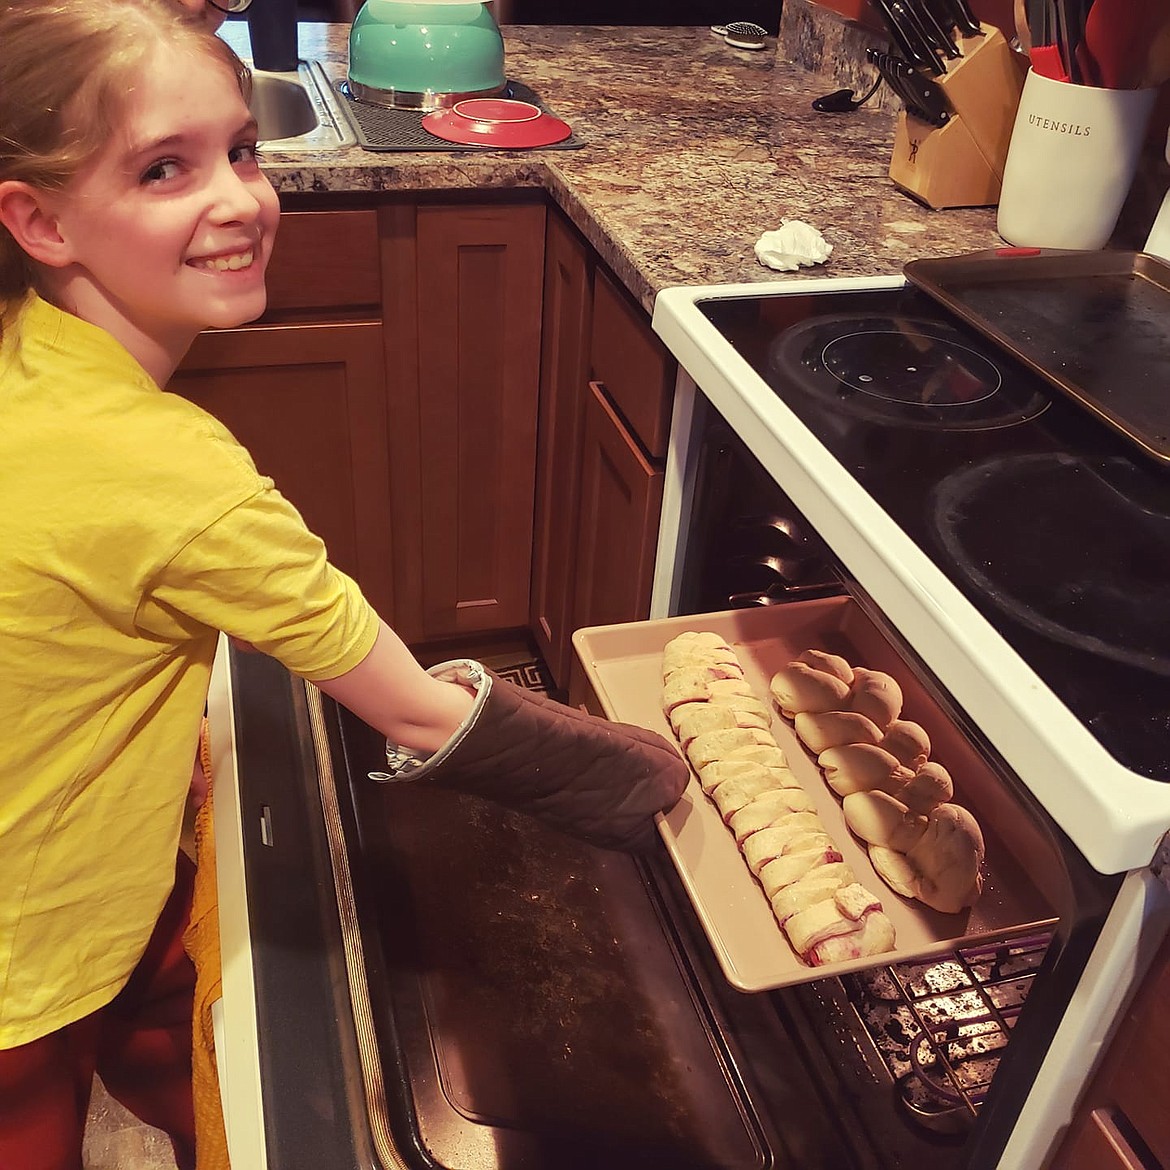 Freya Bearly, a fifth grade student in Mac Hollan's class, baking at home.